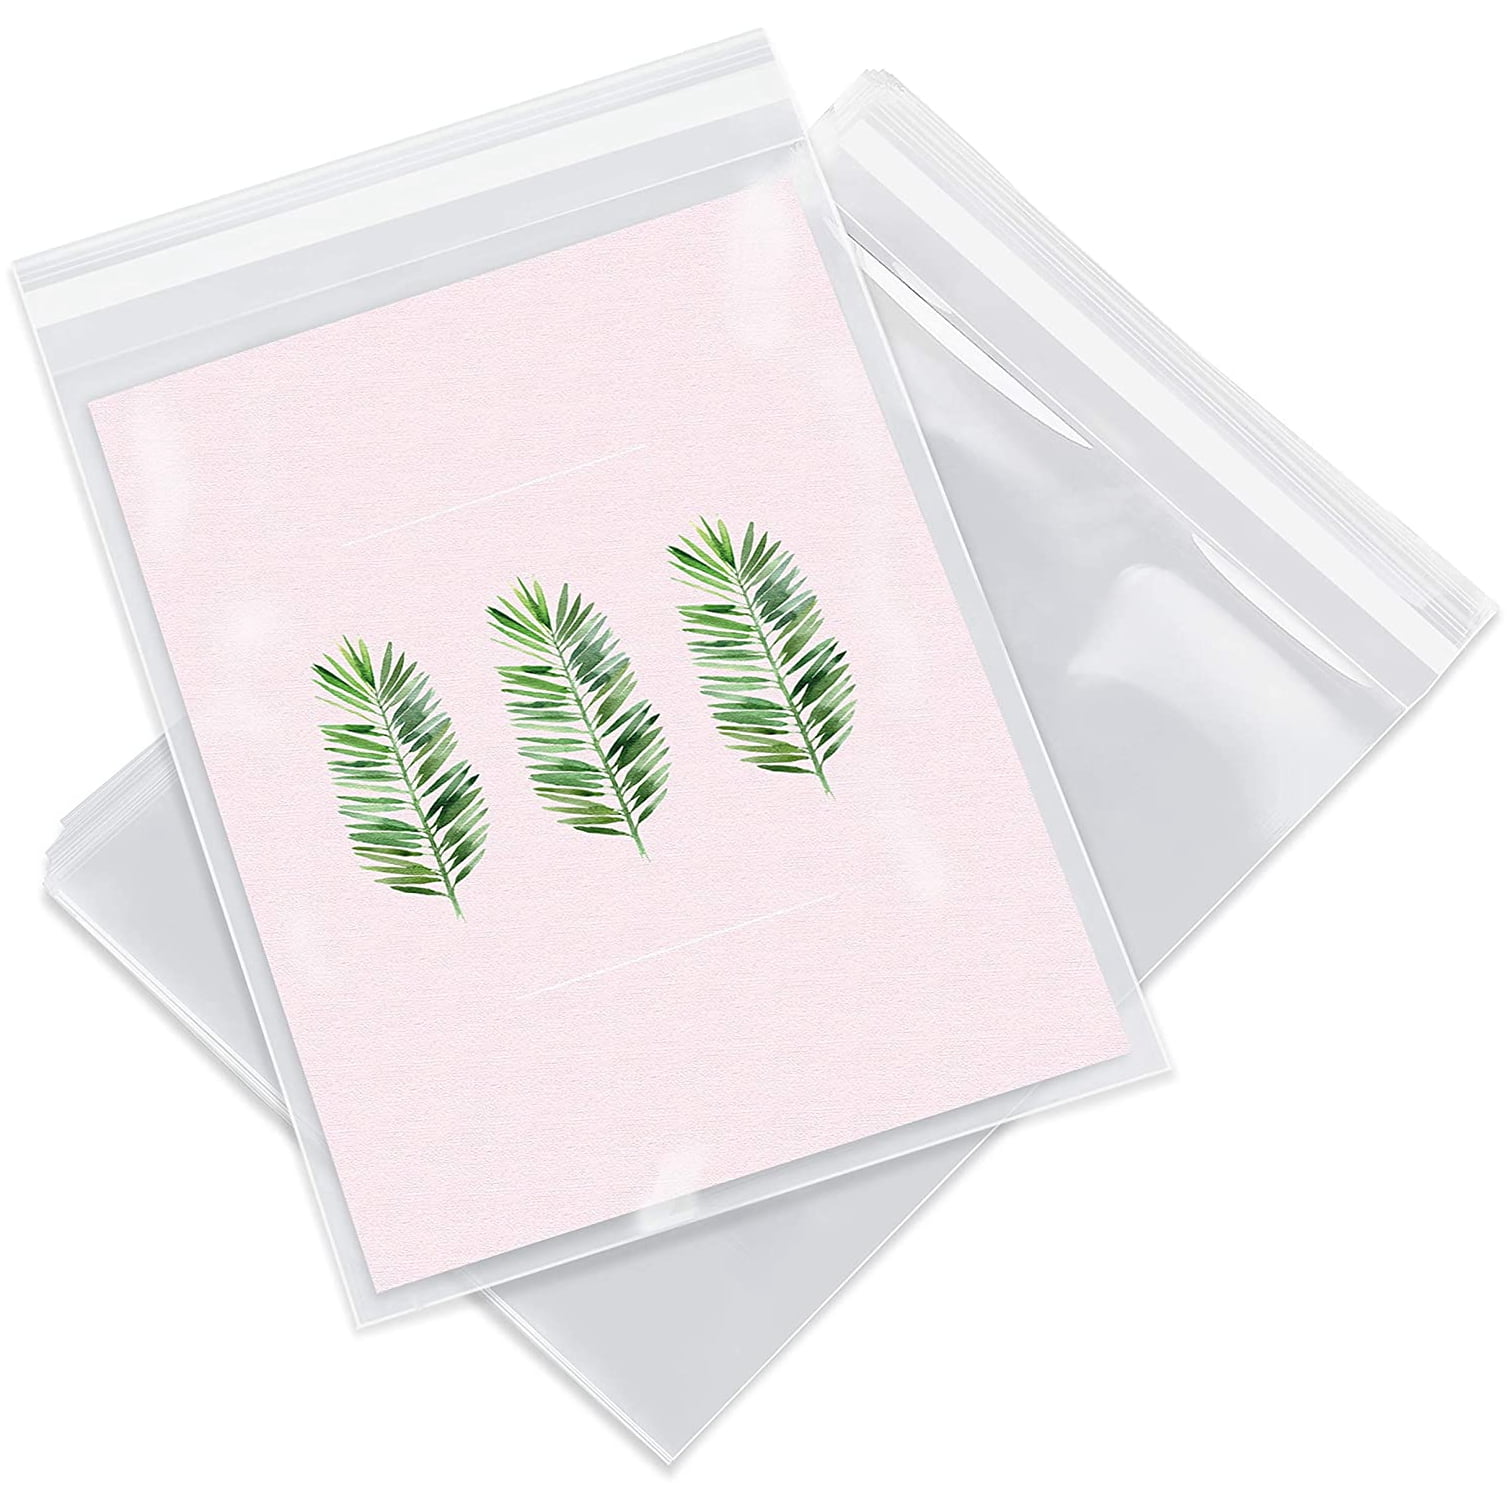 Large Clear Cellophane Non Seal Cello Craft Picture Mount Card Bags 